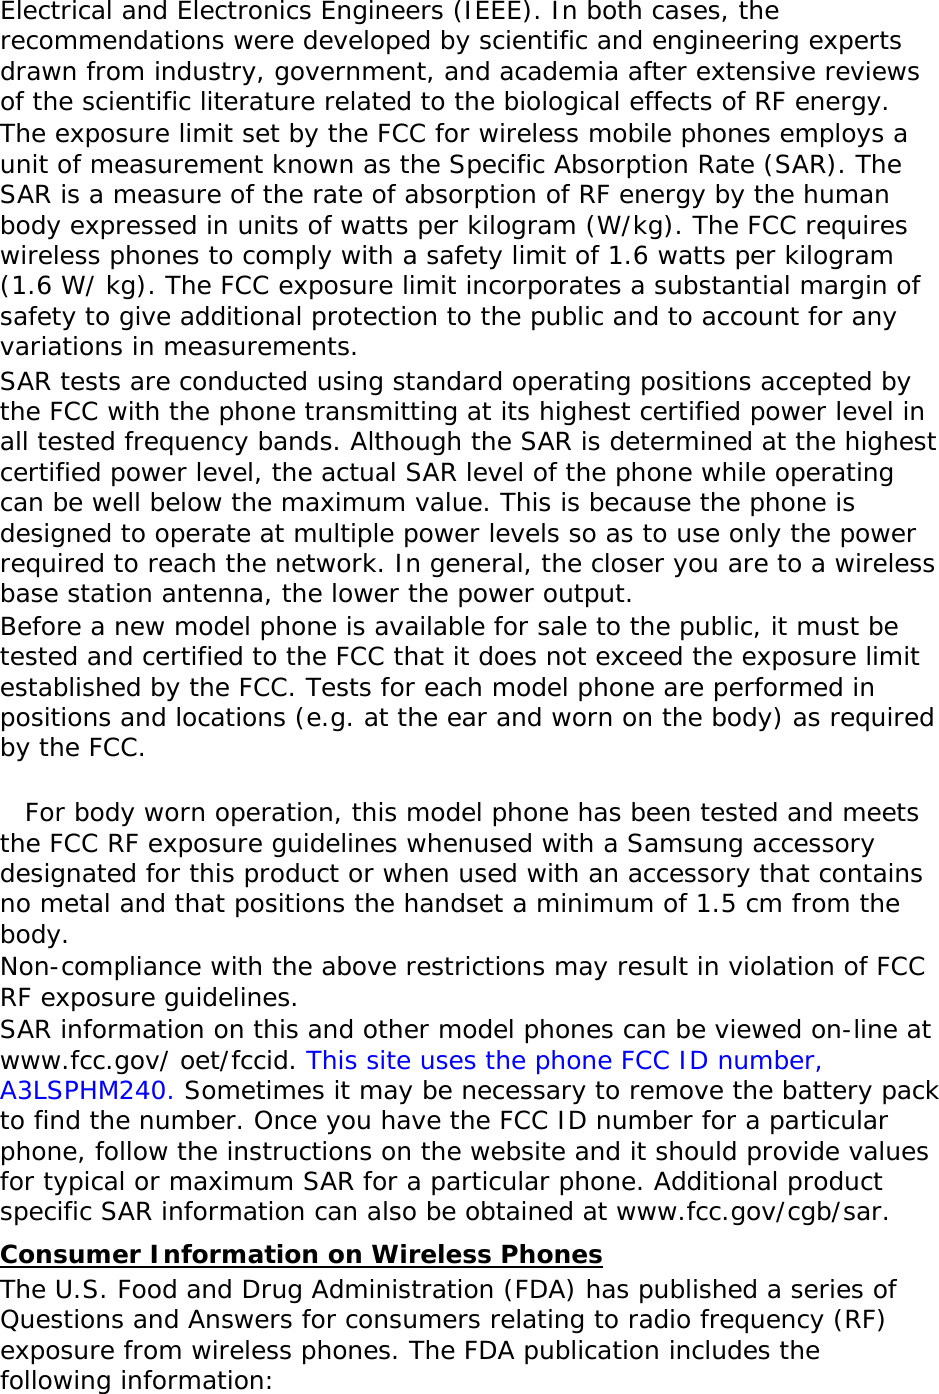   Electrical and Electronics Engineers (IEEE). In both cases, the recommendations were developed by scientific and engineering experts drawn from industry, government, and academia after extensive reviews of the scientific literature related to the biological effects of RF energy. The exposure limit set by the FCC for wireless mobile phones employs a unit of measurement known as the Specific Absorption Rate (SAR). The SAR is a measure of the rate of absorption of RF energy by the human body expressed in units of watts per kilogram (W/kg). The FCC requires wireless phones to comply with a safety limit of 1.6 watts per kilogram (1.6 W/ kg). The FCC exposure limit incorporates a substantial margin of safety to give additional protection to the public and to account for any variations in measurements. SAR tests are conducted using standard operating positions accepted by the FCC with the phone transmitting at its highest certified power level in all tested frequency bands. Although the SAR is determined at the highest certified power level, the actual SAR level of the phone while operating can be well below the maximum value. This is because the phone is designed to operate at multiple power levels so as to use only the power required to reach the network. In general, the closer you are to a wireless base station antenna, the lower the power output. Before a new model phone is available for sale to the public, it must be tested and certified to the FCC that it does not exceed the exposure limit established by the FCC. Tests for each model phone are performed in positions and locations (e.g. at the ear and worn on the body) as required by the FCC.    For body worn operation, this model phone has been tested and meets the FCC RF exposure guidelines whenused with a Samsung accessory designated for this product or when used with an accessory that contains no metal and that positions the handset a minimum of 1.5 cm from the body.  Non-compliance with the above restrictions may result in violation of FCC RF exposure guidelines. SAR information on this and other model phones can be viewed on-line at www.fcc.gov/ oet/fccid. This site uses the phone FCC ID number, A3LSPHM240. Sometimes it may be necessary to remove the battery pack to find the number. Once you have the FCC ID number for a particular phone, follow the instructions on the website and it should provide values for typical or maximum SAR for a particular phone. Additional product specific SAR information can also be obtained at www.fcc.gov/cgb/sar. Consumer Information on Wireless Phones The U.S. Food and Drug Administration (FDA) has published a series of Questions and Answers for consumers relating to radio frequency (RF) exposure from wireless phones. The FDA publication includes the following information: 